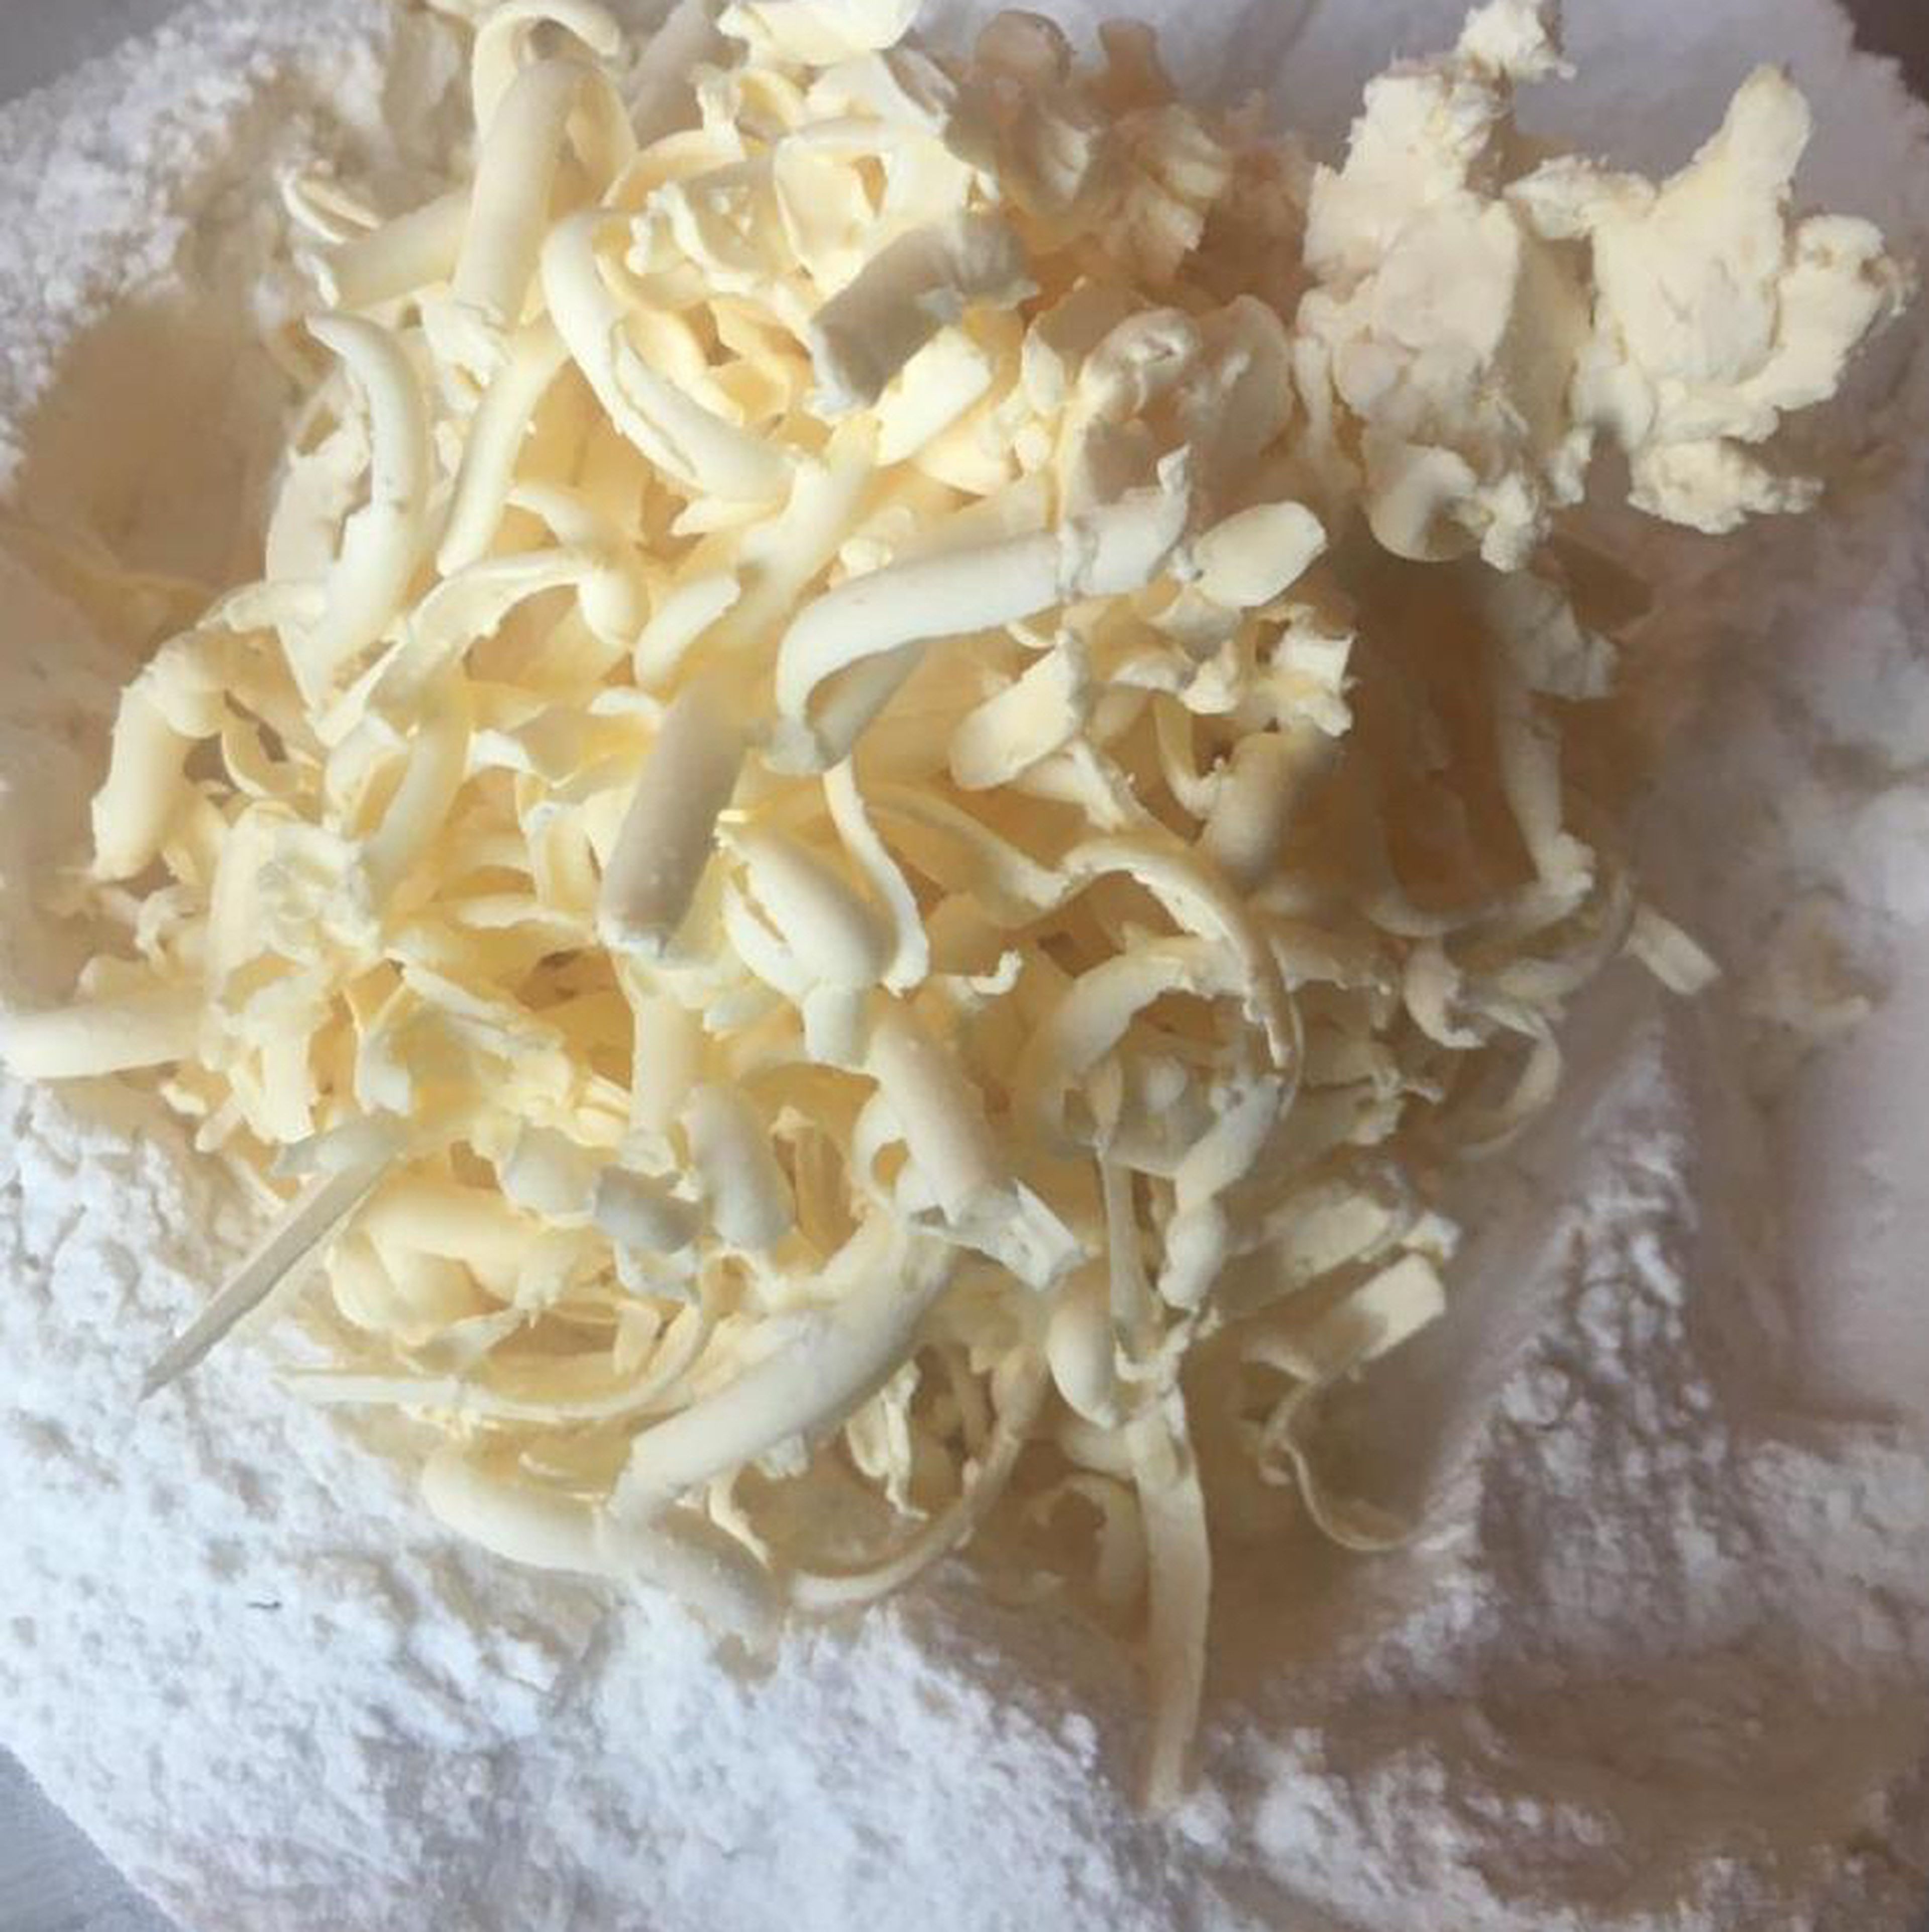 after we mix flour and egg yolks we need to add soft butter a pinch of salt ,100 g sour cream and 100 ml of warm water and mix either with hand or mixer with dough hook